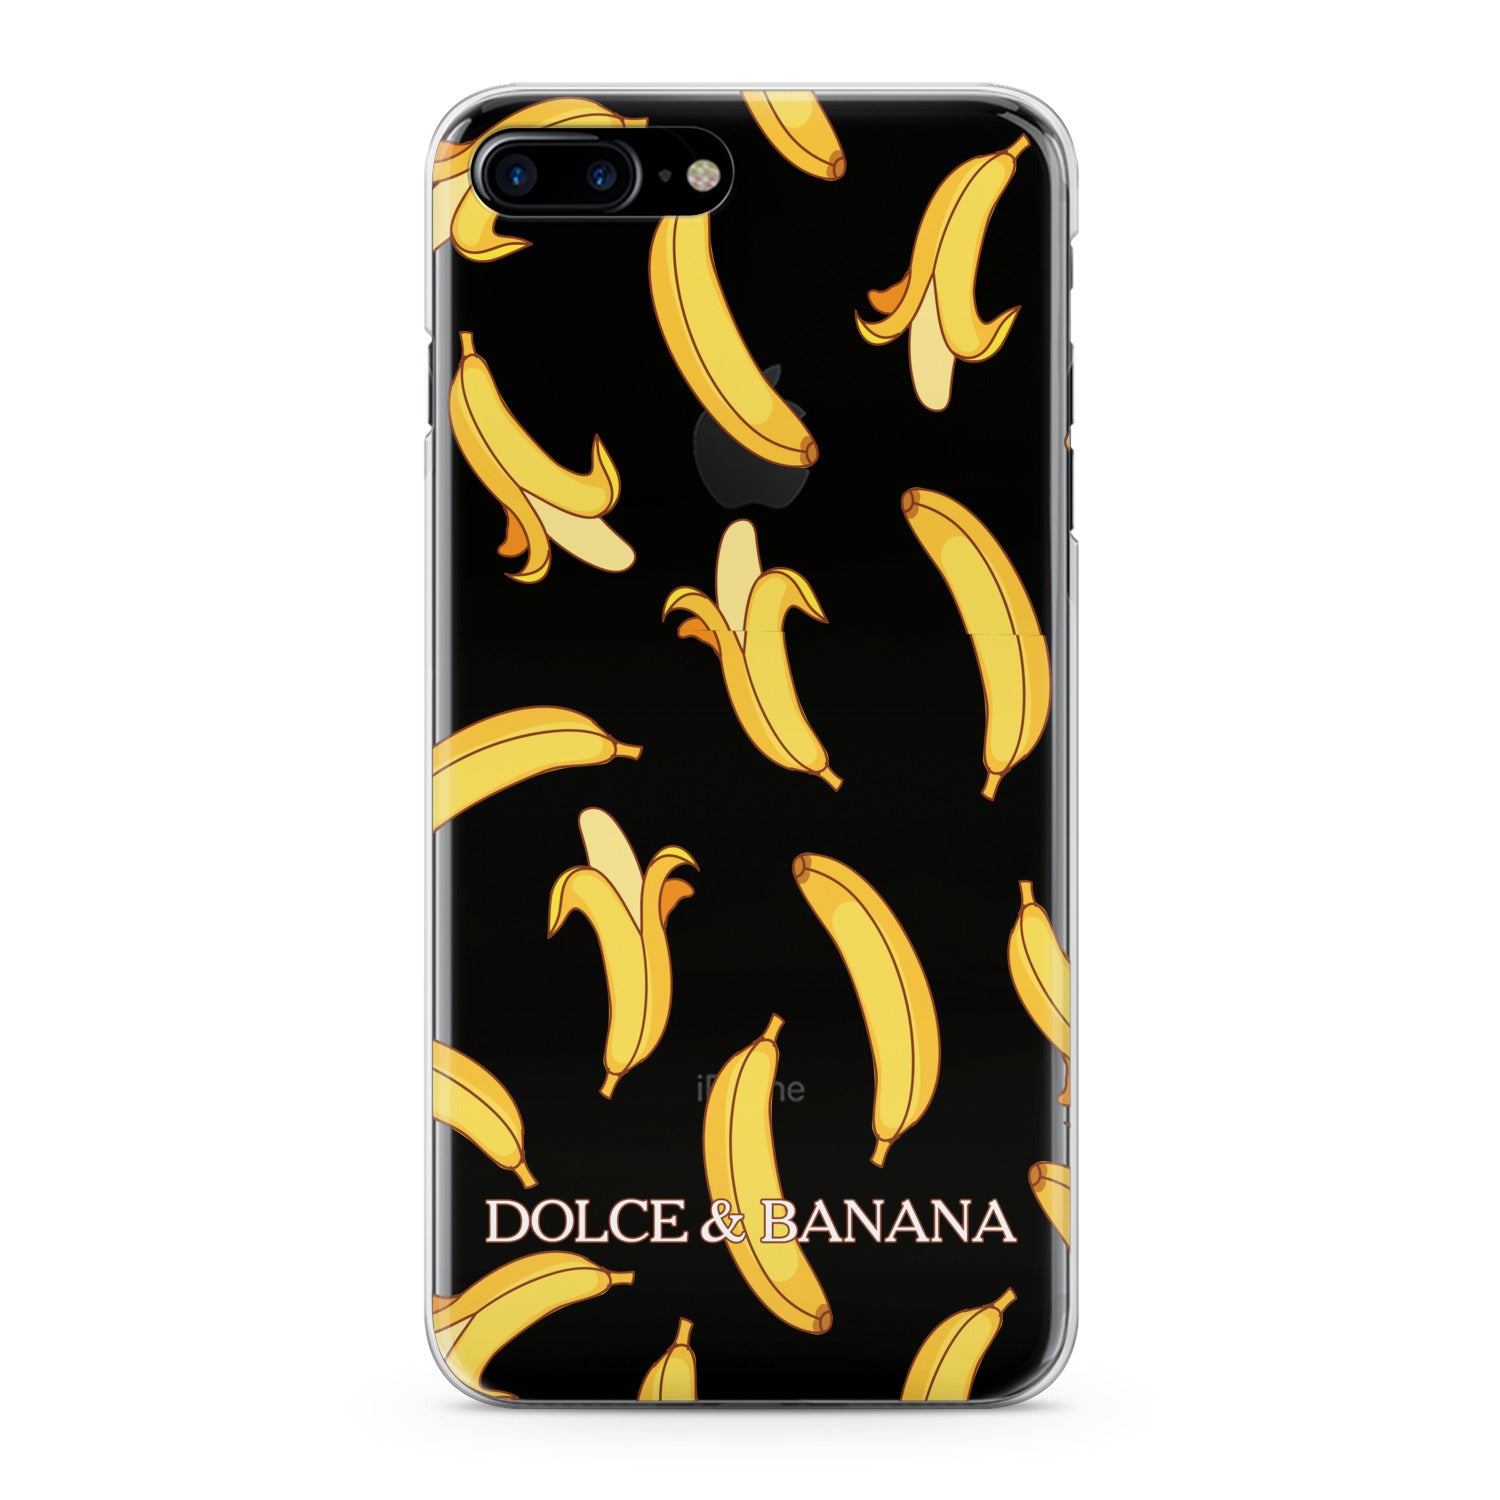 Lex Altern Bright Banana Phone Case for your iPhone & Android phone.